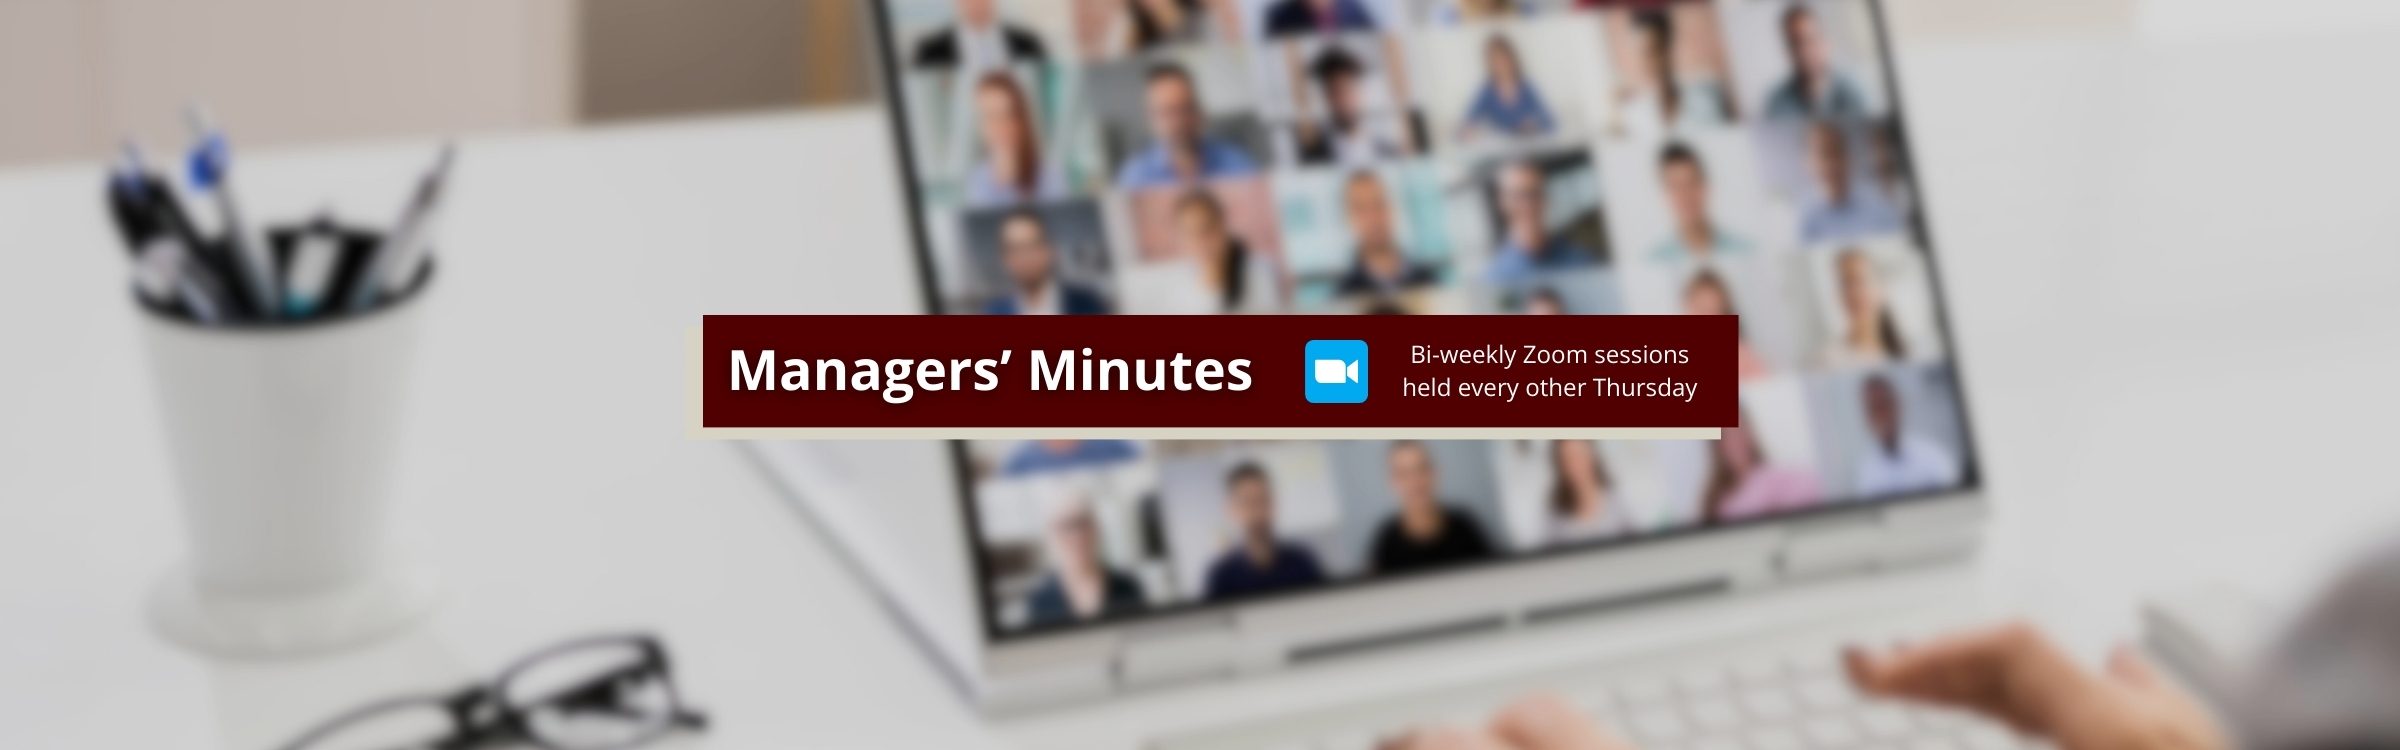 Managers’ Minutes Zoom Meetings